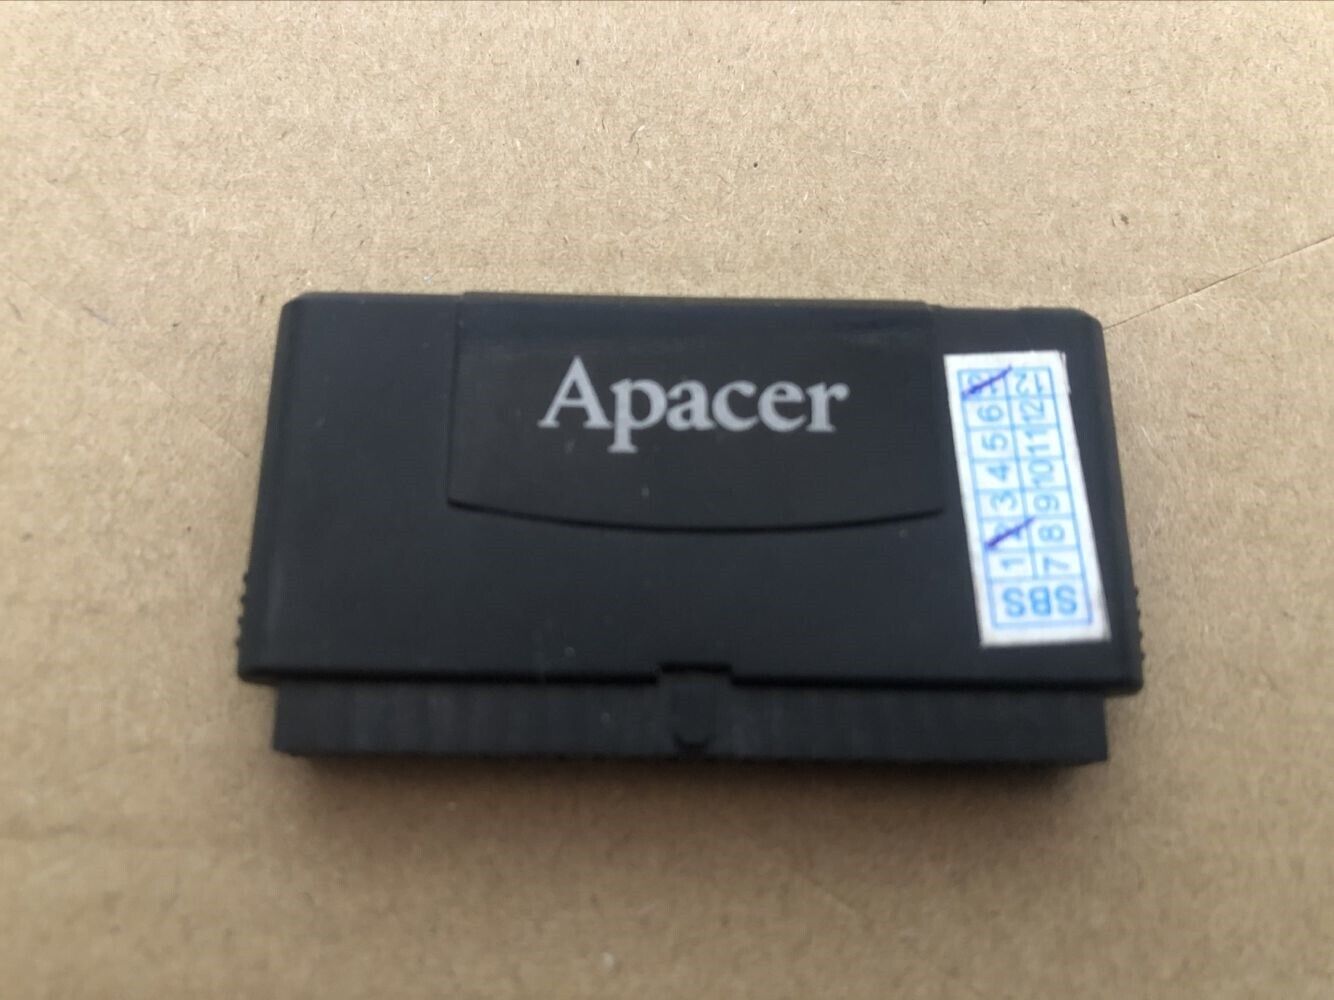 Apacer 1GB 44-Pin  DOM Disk On Module 44PIN PATA/IDE/EIDE